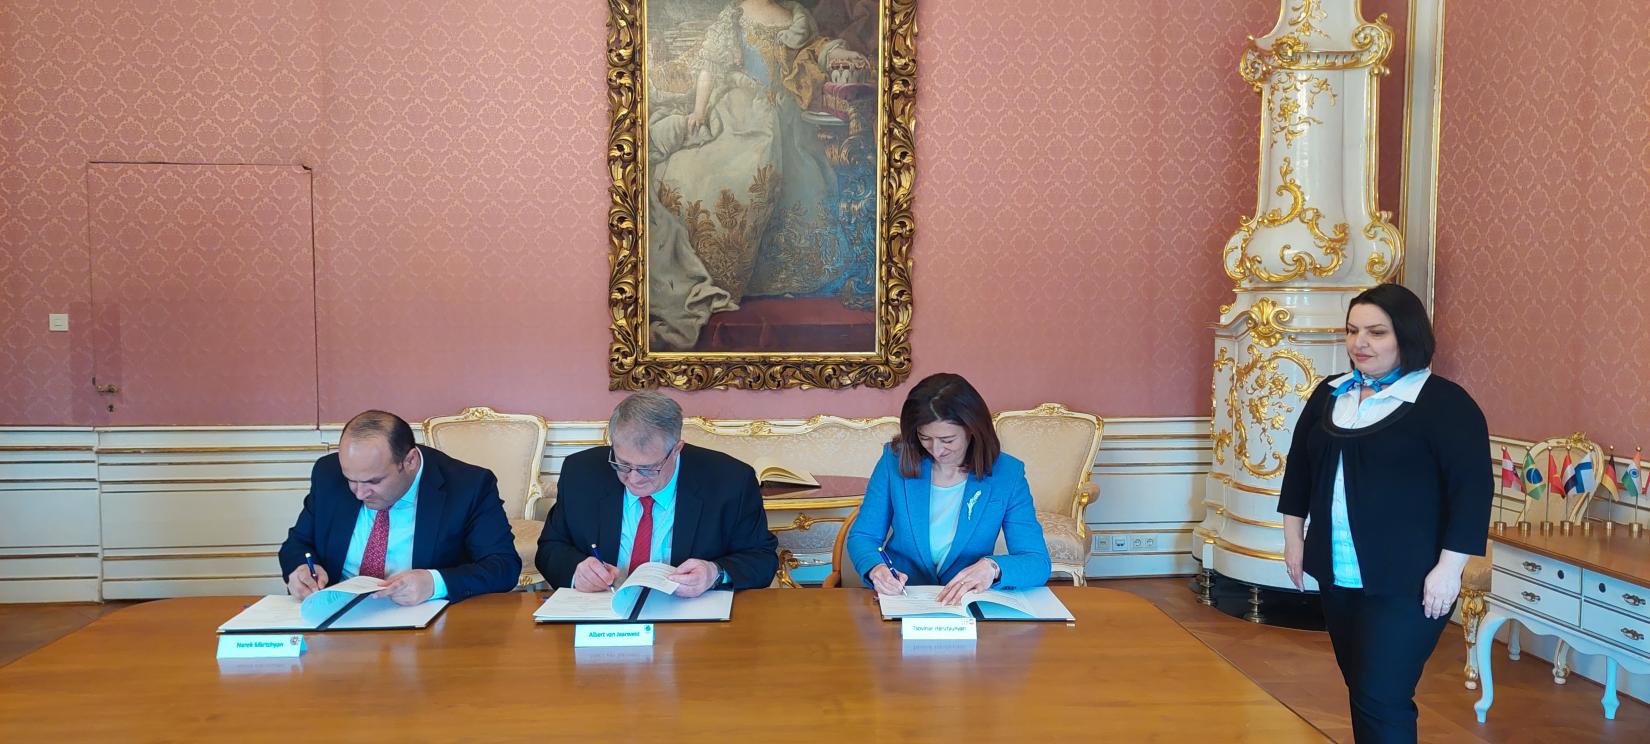 Three people (two men and a woman) are signing the Memorandum of Understanding and a woman is standing next to them.